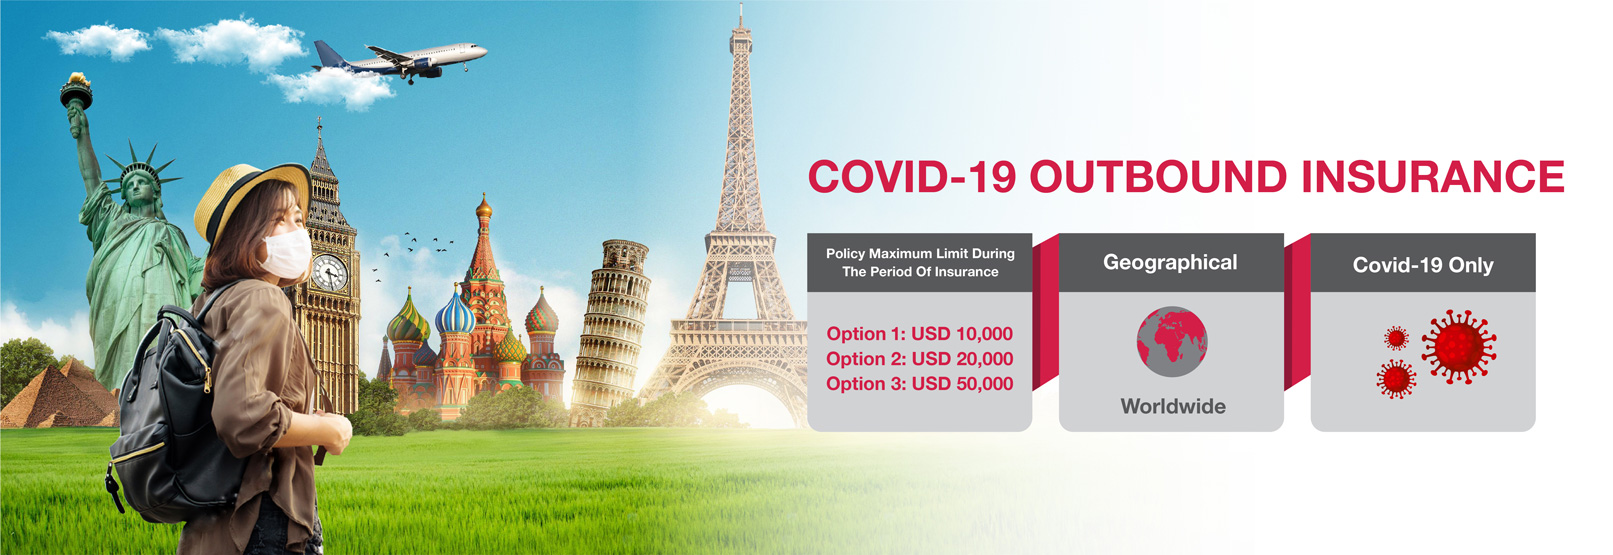 Covid-19 Outbound Insurance